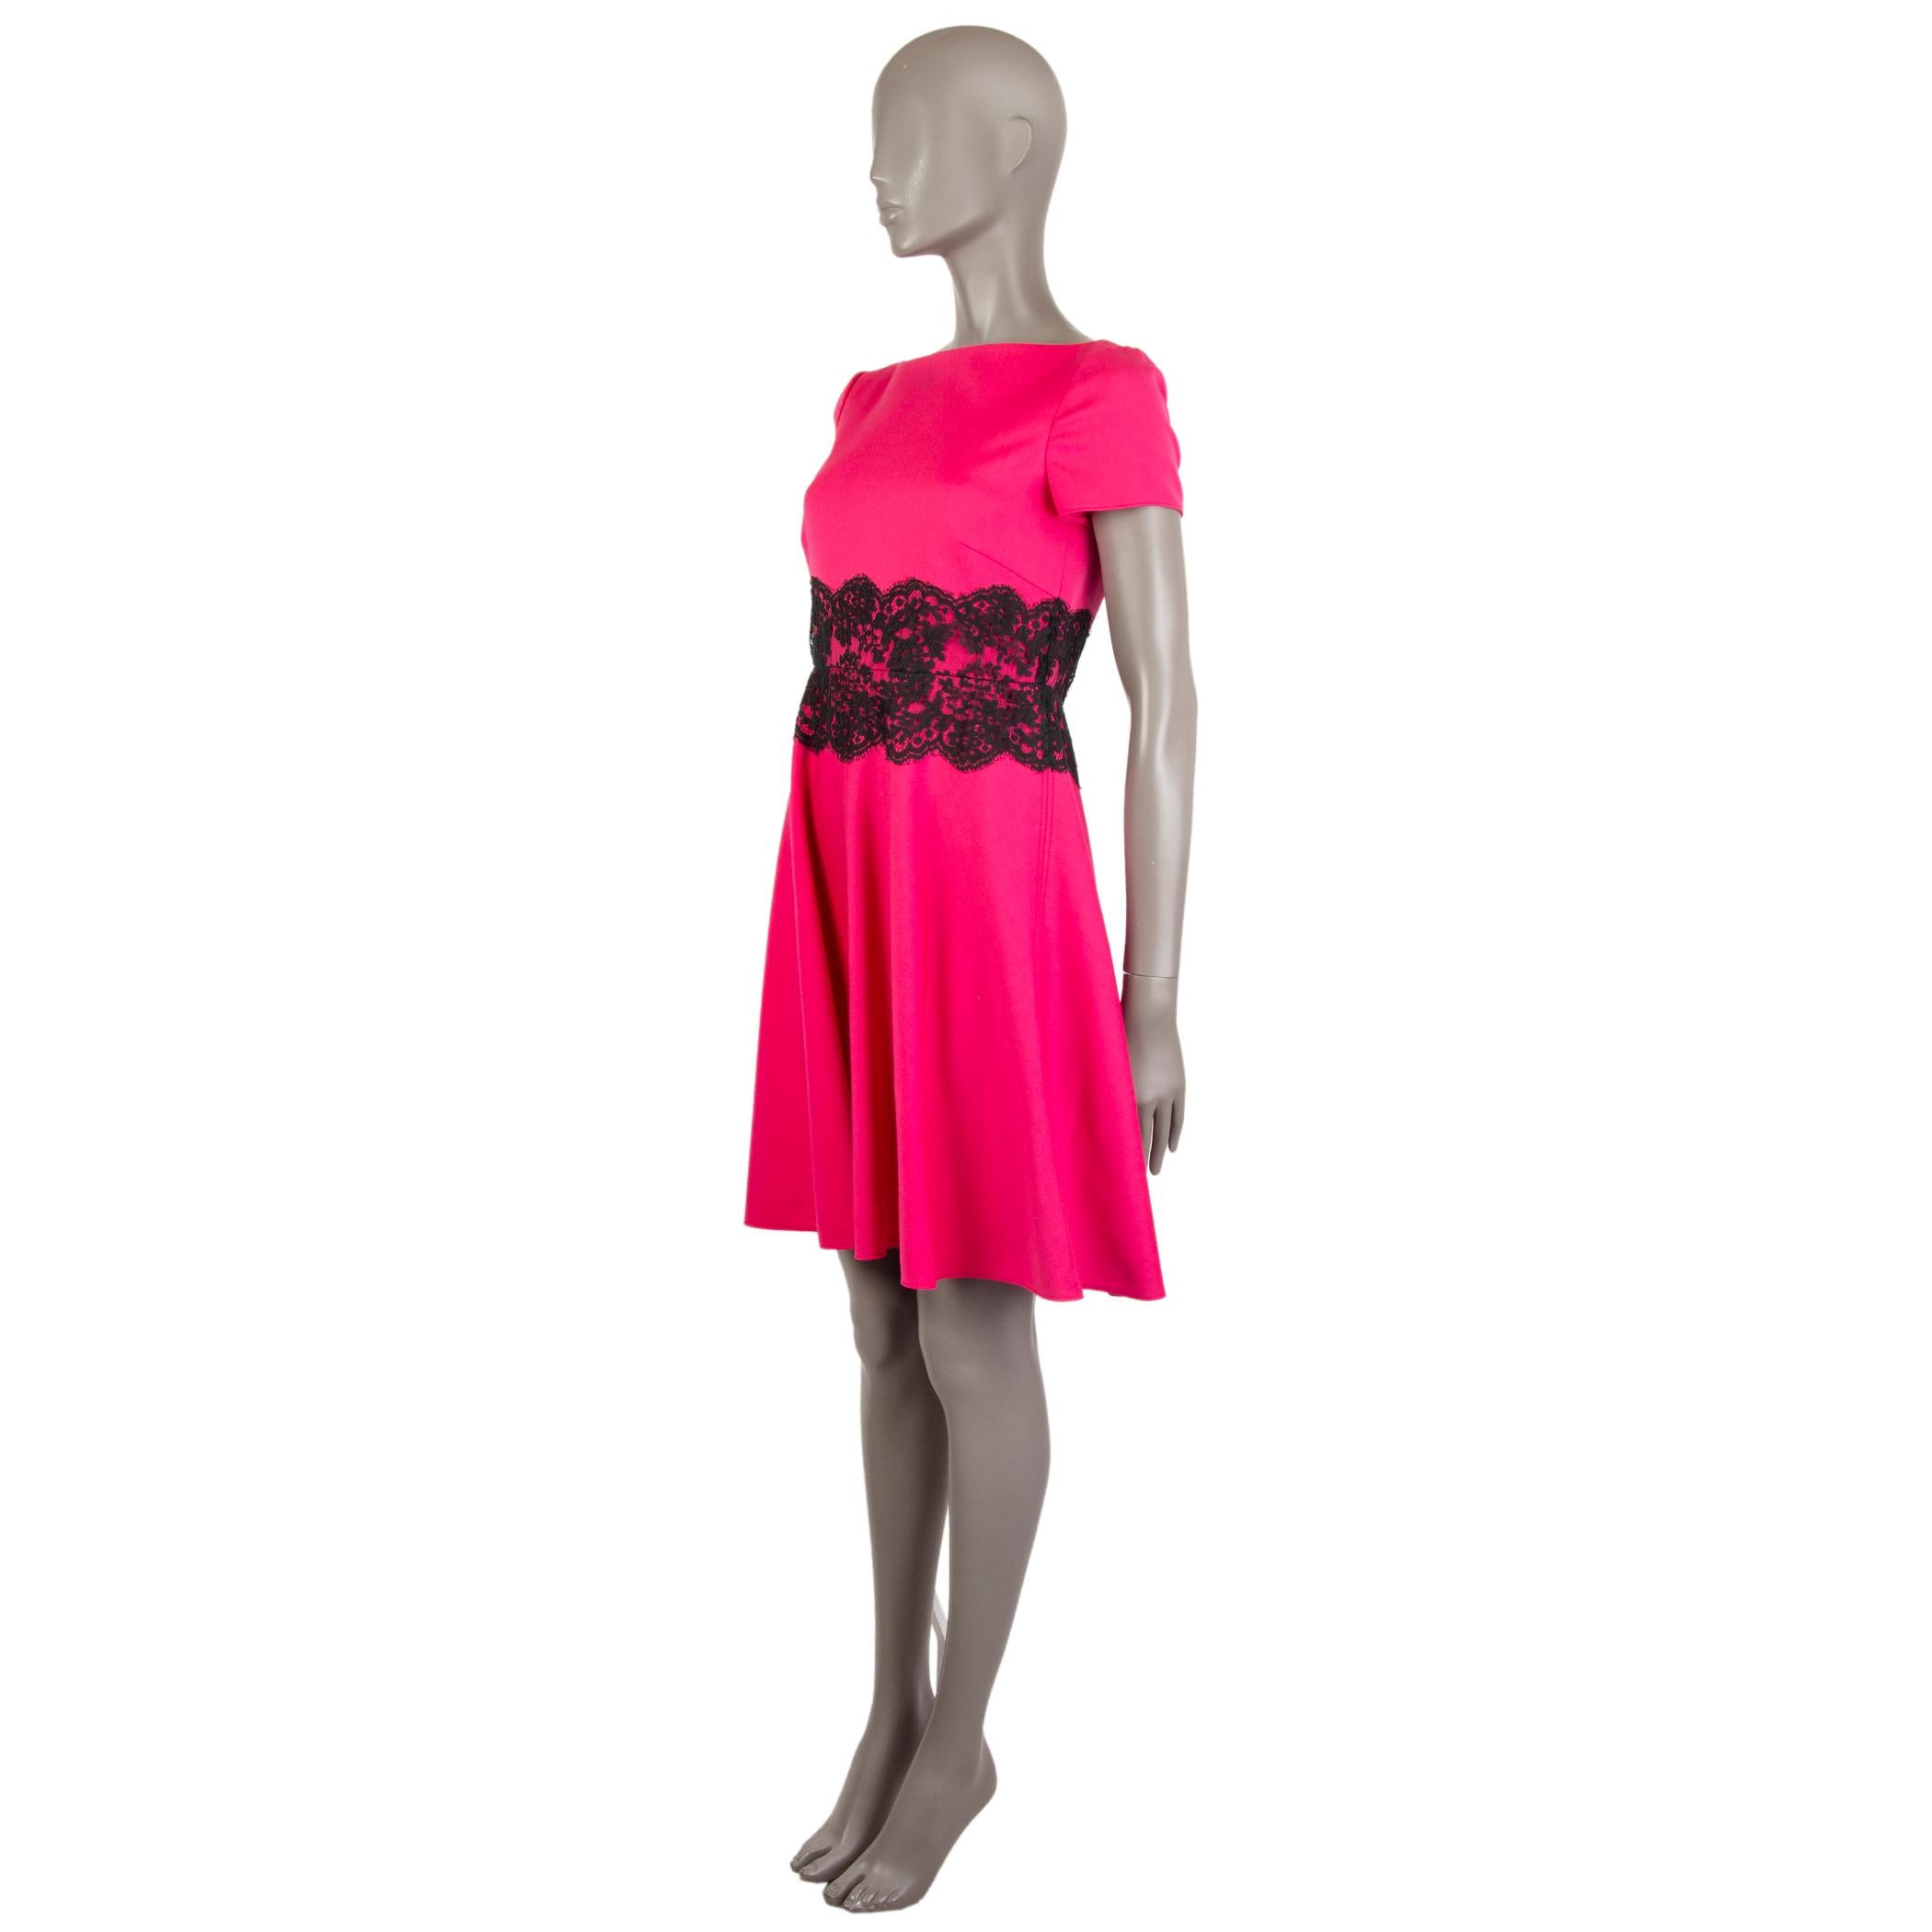 Valentino Techocouture short.sleeve dress in fucsia wool (90%), nylon (8%), and elastane (2%). With lace panel around the waist in black cotton (75%) and nylon (25%). Closes with hook and invisible zipper on the back. Lined in fucsia polyester (96%)